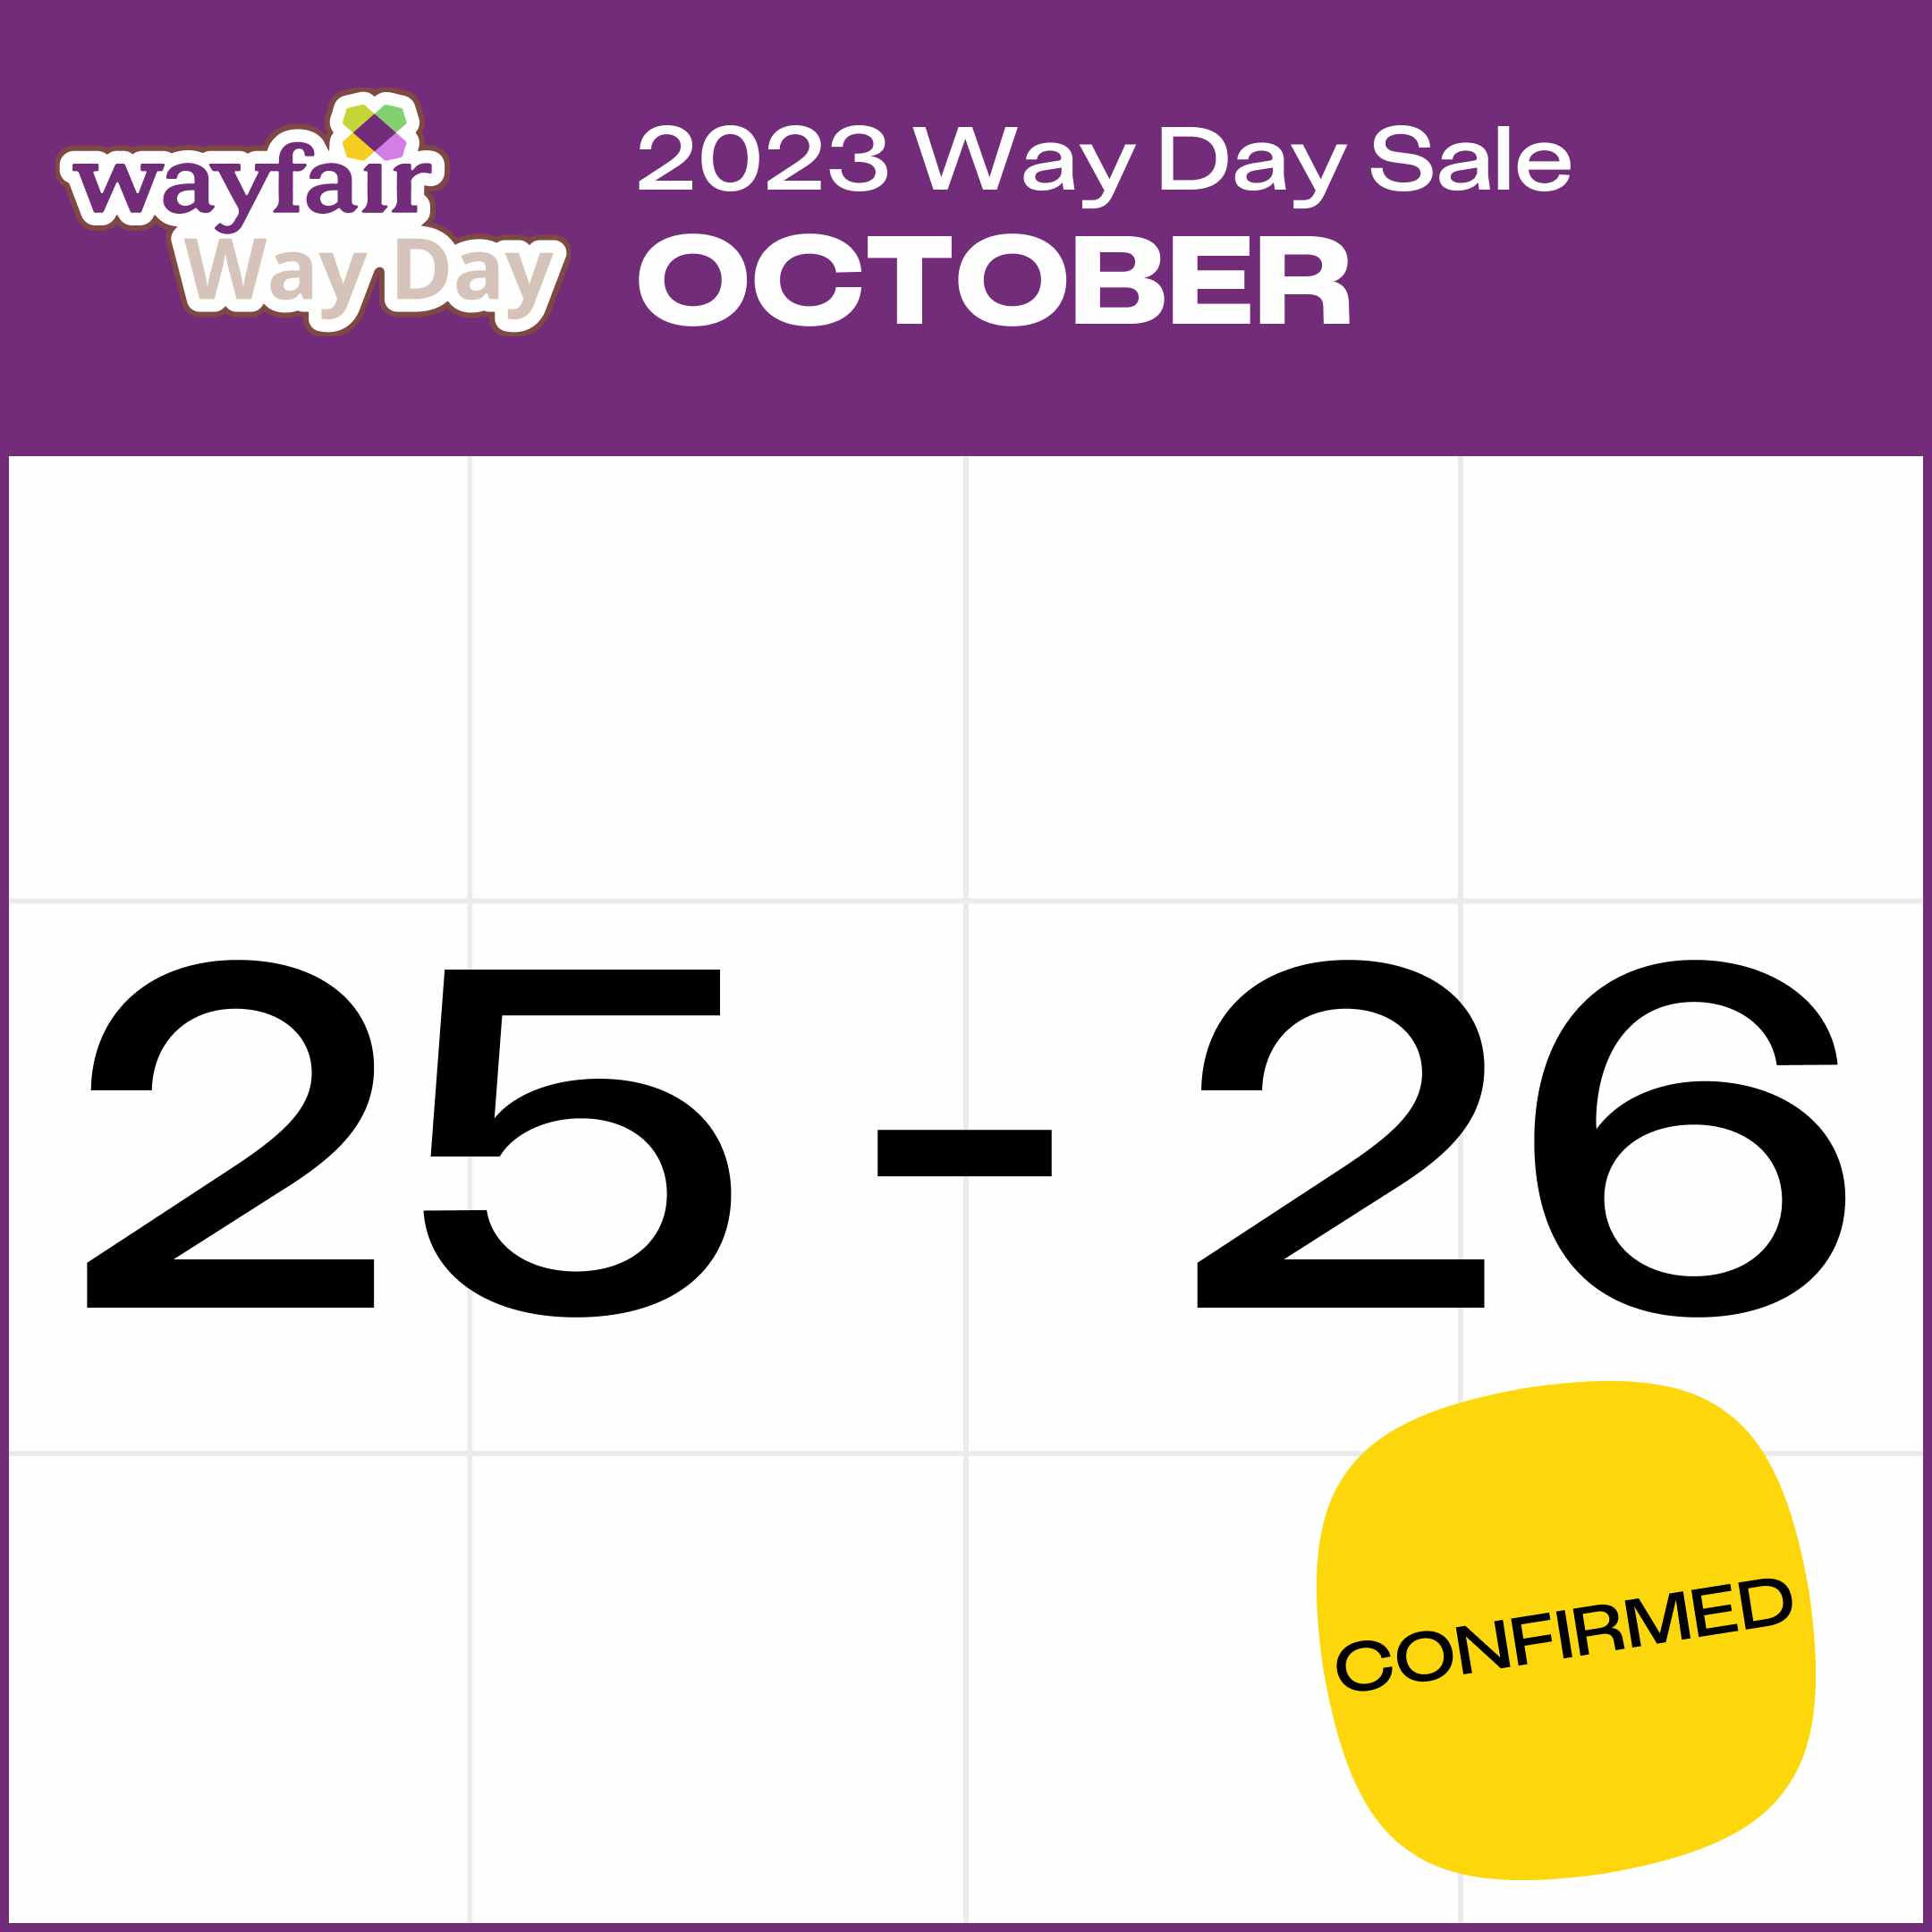 https://prod-cdn-thekrazycouponlady.imgix.net/wp-content/uploads/2020/09/way-day-2023-dates-1697642958-1697642958.png?auto=format&fit=fill&q=25